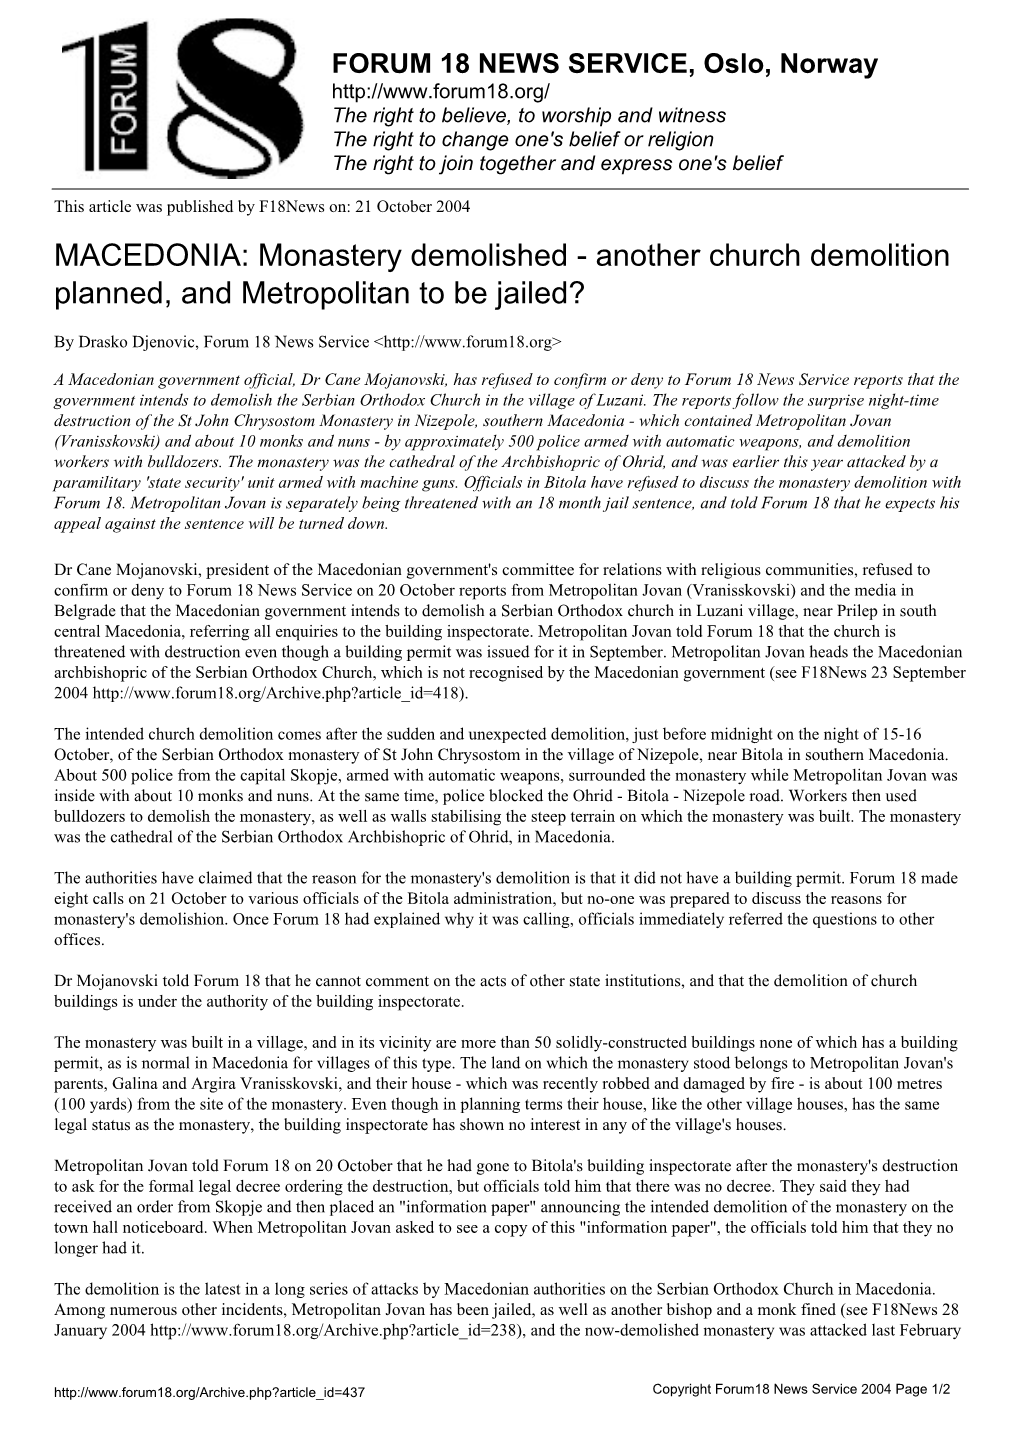 MACEDONIA: Monastery Demolished - Another Church Demolition Planned, and Metropolitan to Be Jailed?